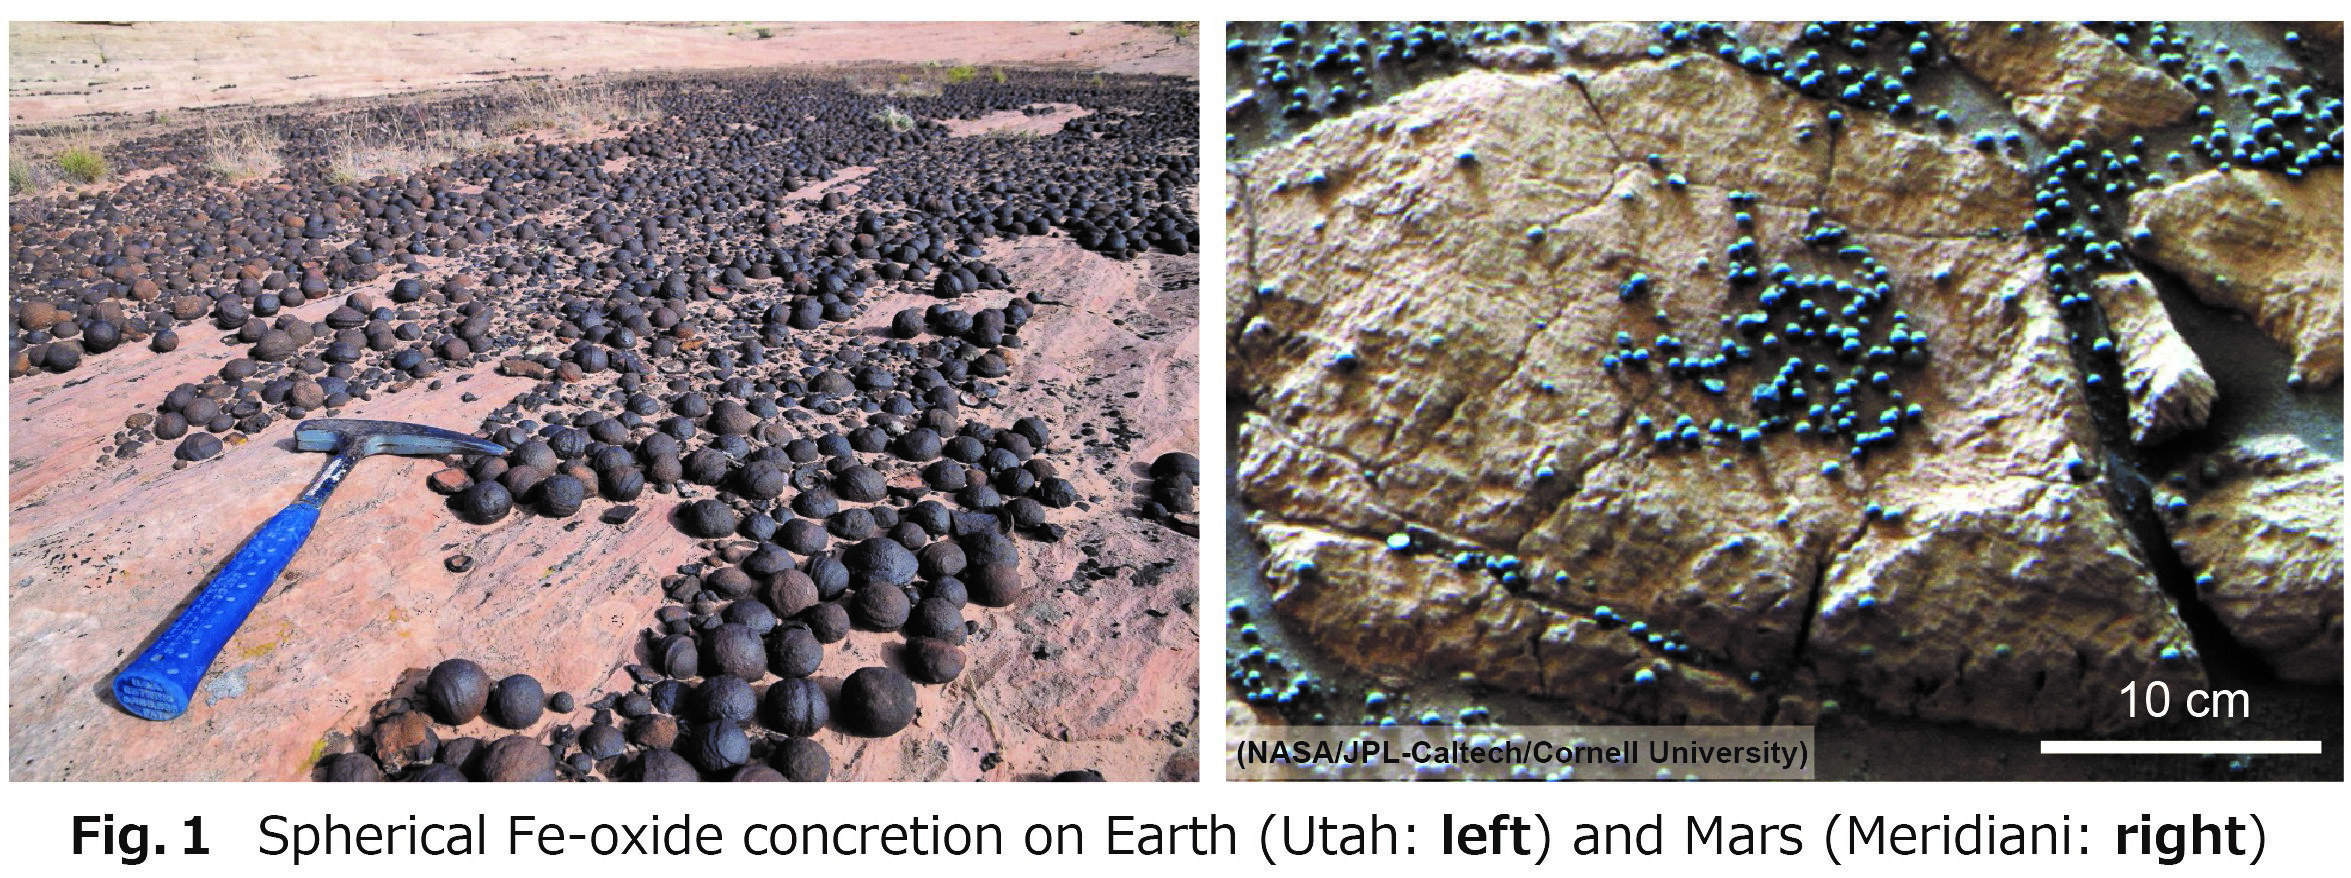 Iron-oxide concretions and nodules